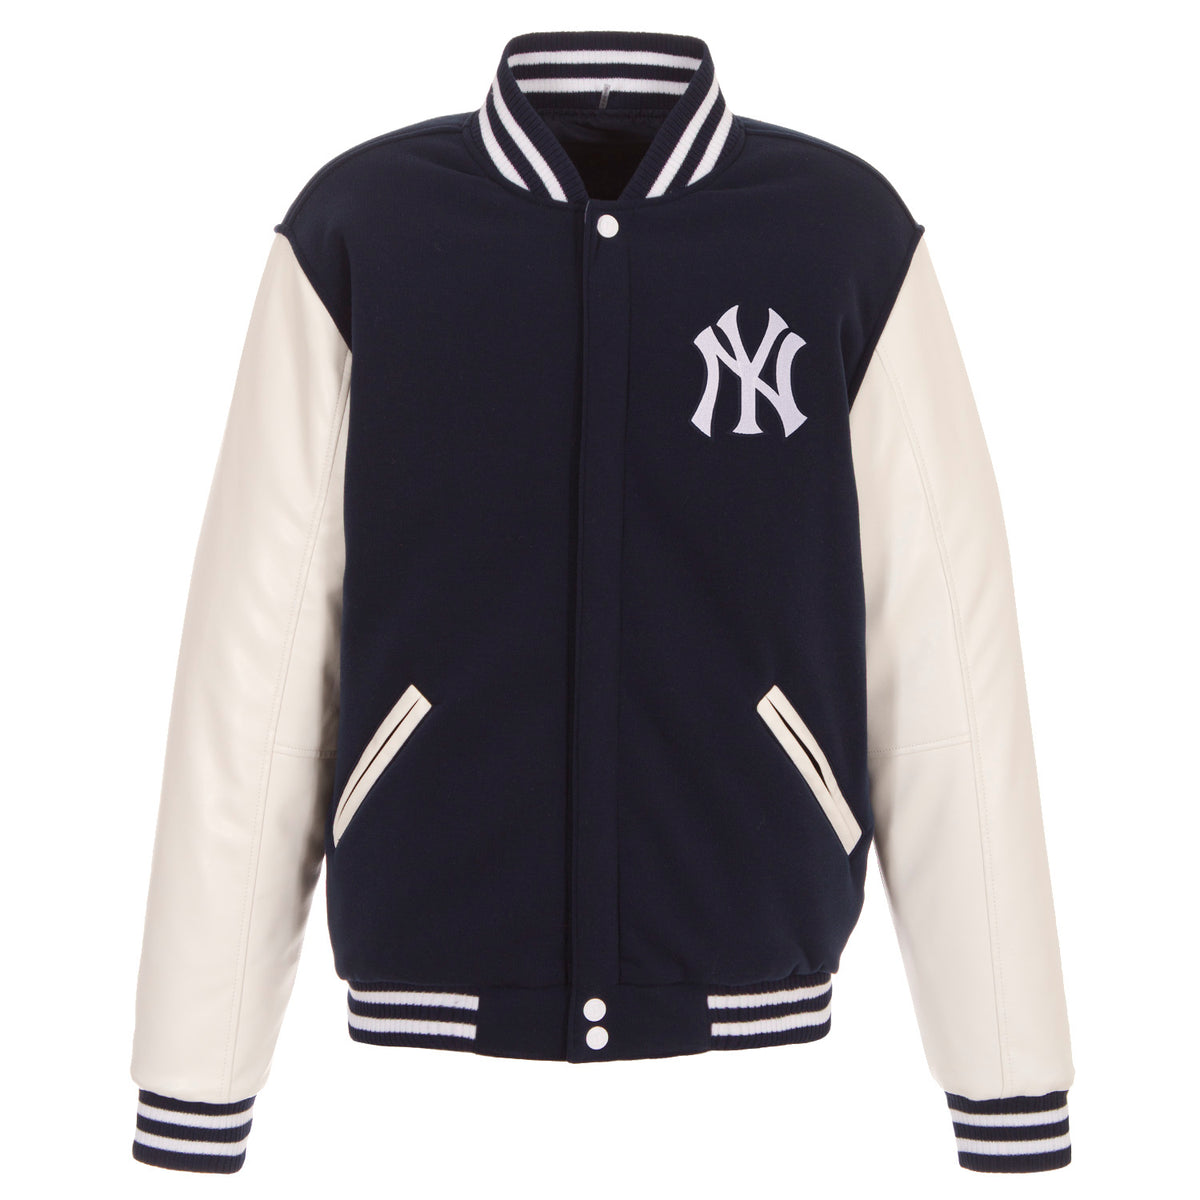 New York Yankees - JH Design Reversible Fleece Jacket with Faux Leather